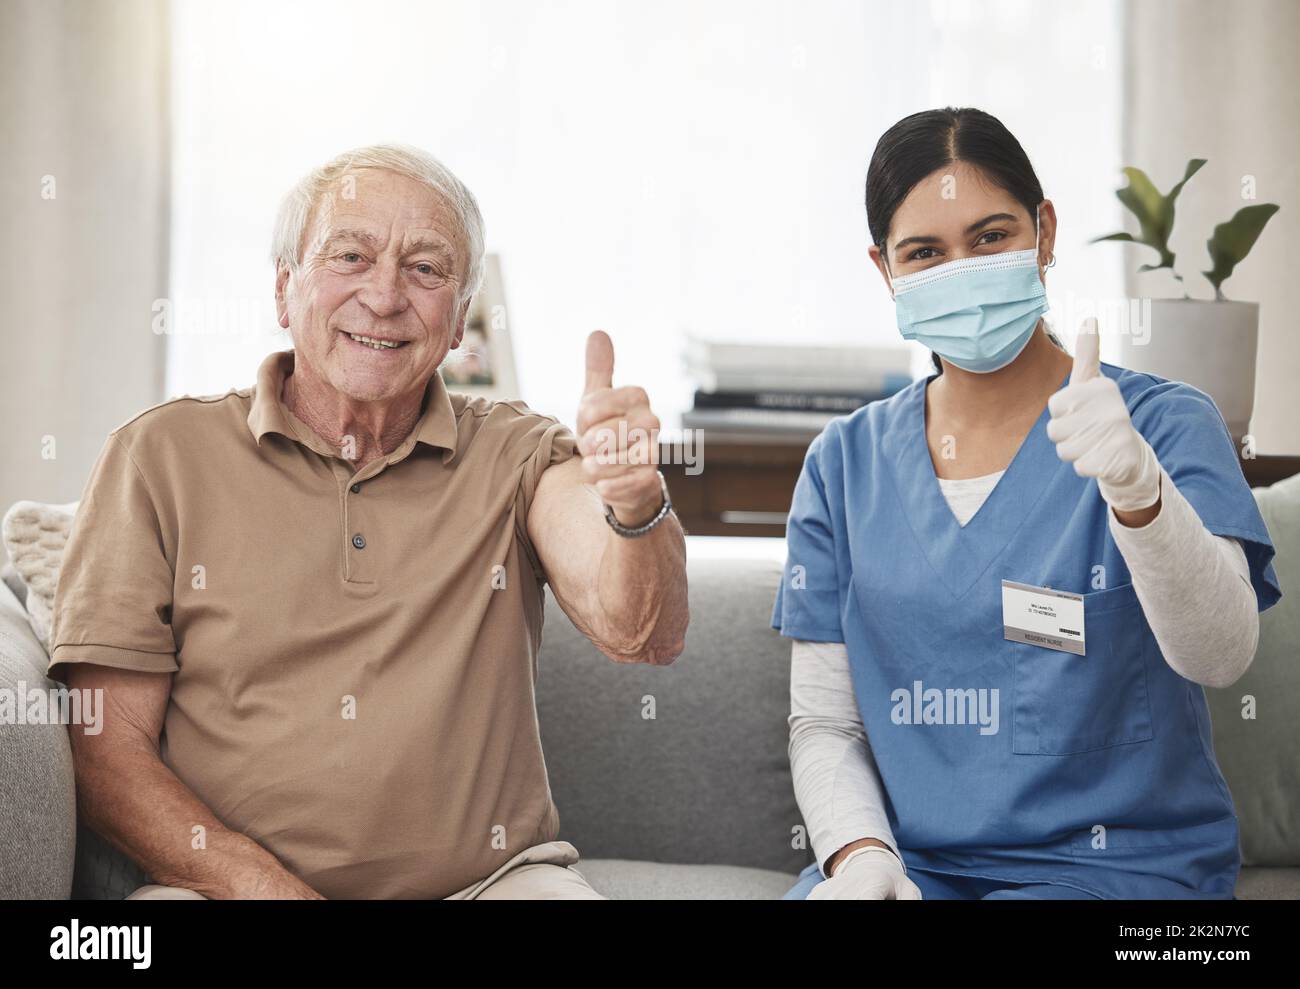 Protect yourself and get vaccinated. Shot of an elderly man and a young female nurse showing a thumbs up during a checkup at home. Stock Photo